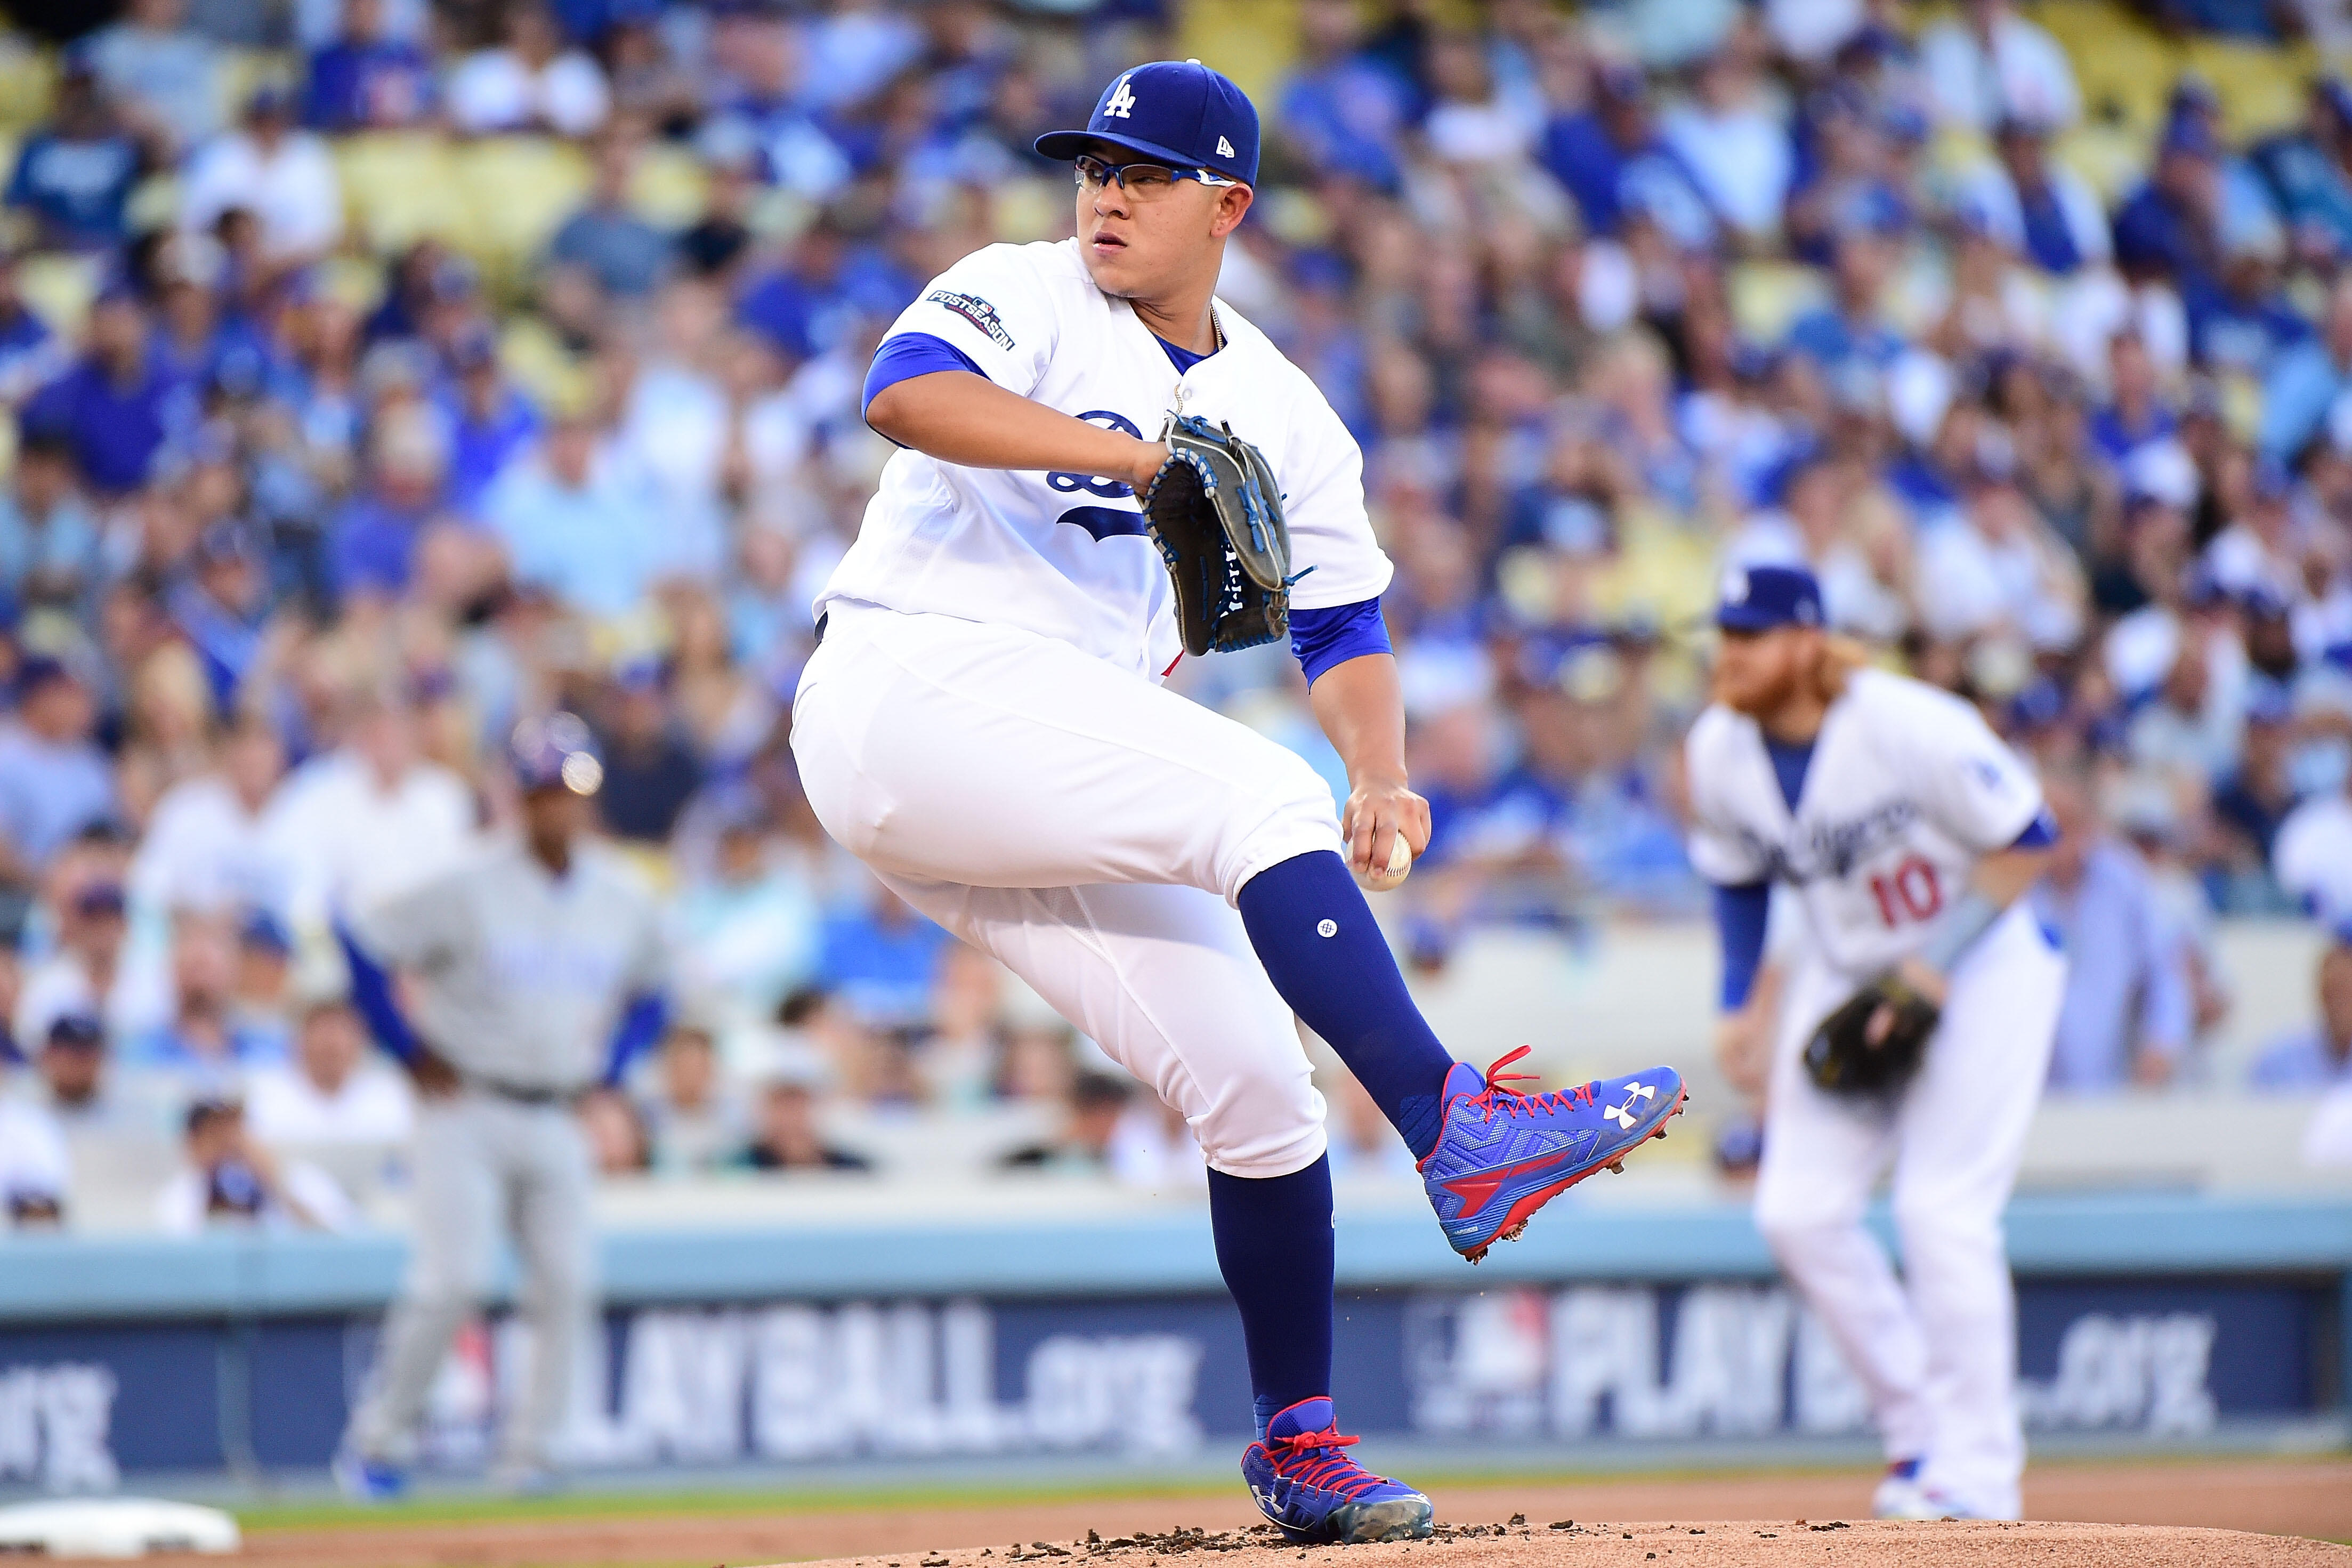 LOS ANGELES, CA - OCTOBER 19:  Julio Urias #7 of the Los Angeles Dodgers delivers a pitch against the Chicago Cubs in the first inning of game four of the National League Championship Series at Dodger Stadium on October 19, 2016 in Los Angeles, California